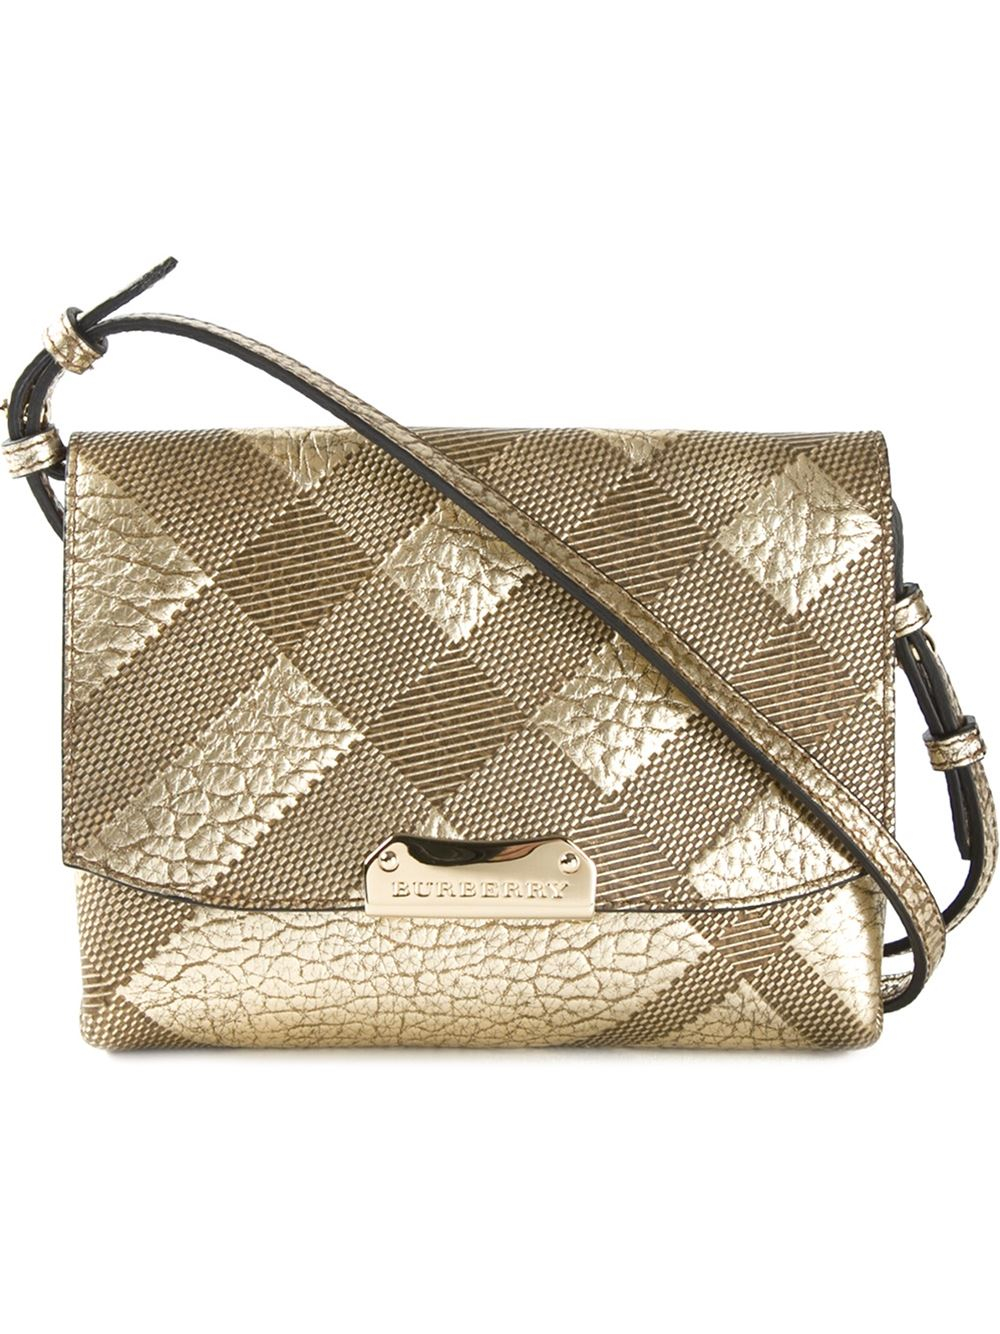 Burberry Embossed-Check Leather Cross-Body Bag in Metallic | Lyst